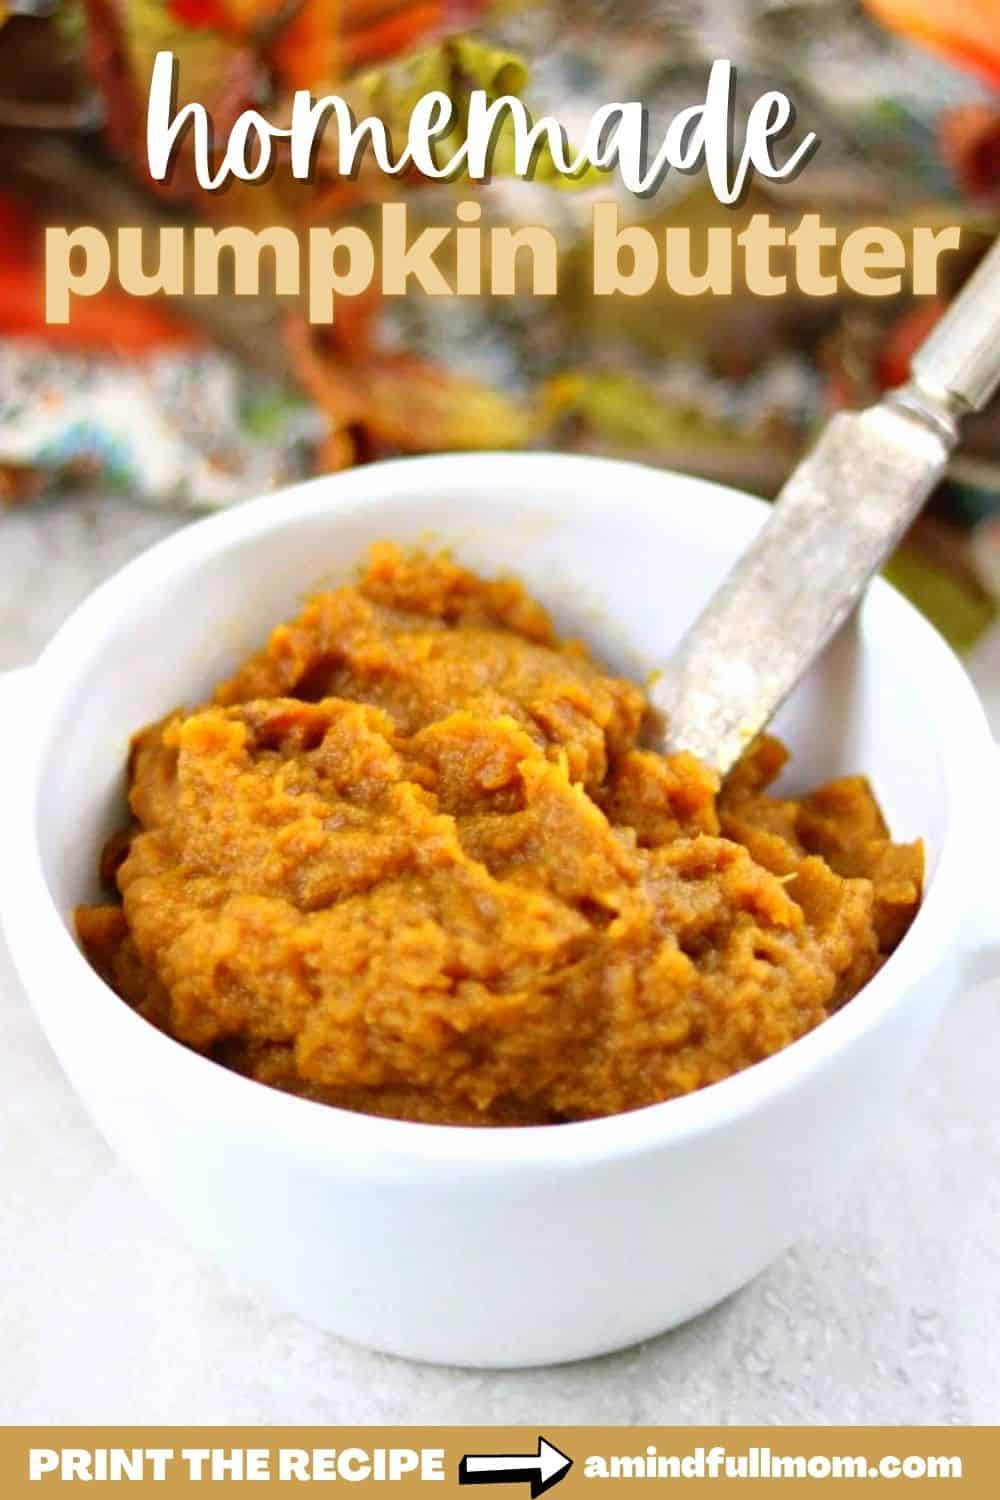 Filled with warming spices and sweetened naturally with apple cider and maple syrup, Homemade Pumpkin Butter is easy to make and positively divine. Use this refined sugar-free pumpkin butter on everything from toast to biscuits to pancakes.